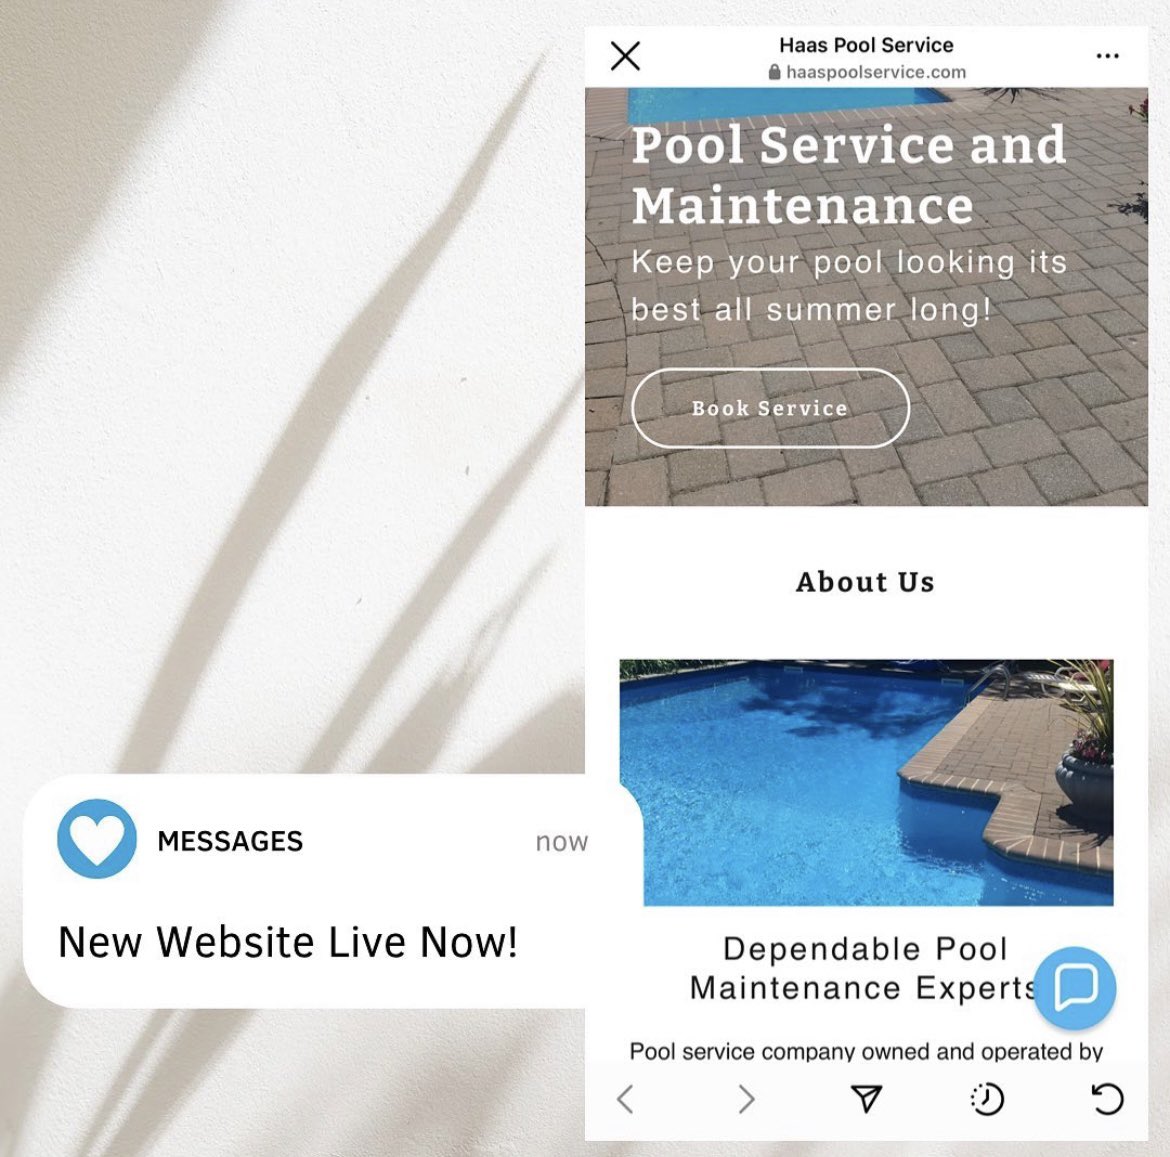 Our website is live right now!! Check out the link in our bio! #lipools #poolmainenance #poolrepair #liners #haaspoolservice #affordable #poolservice